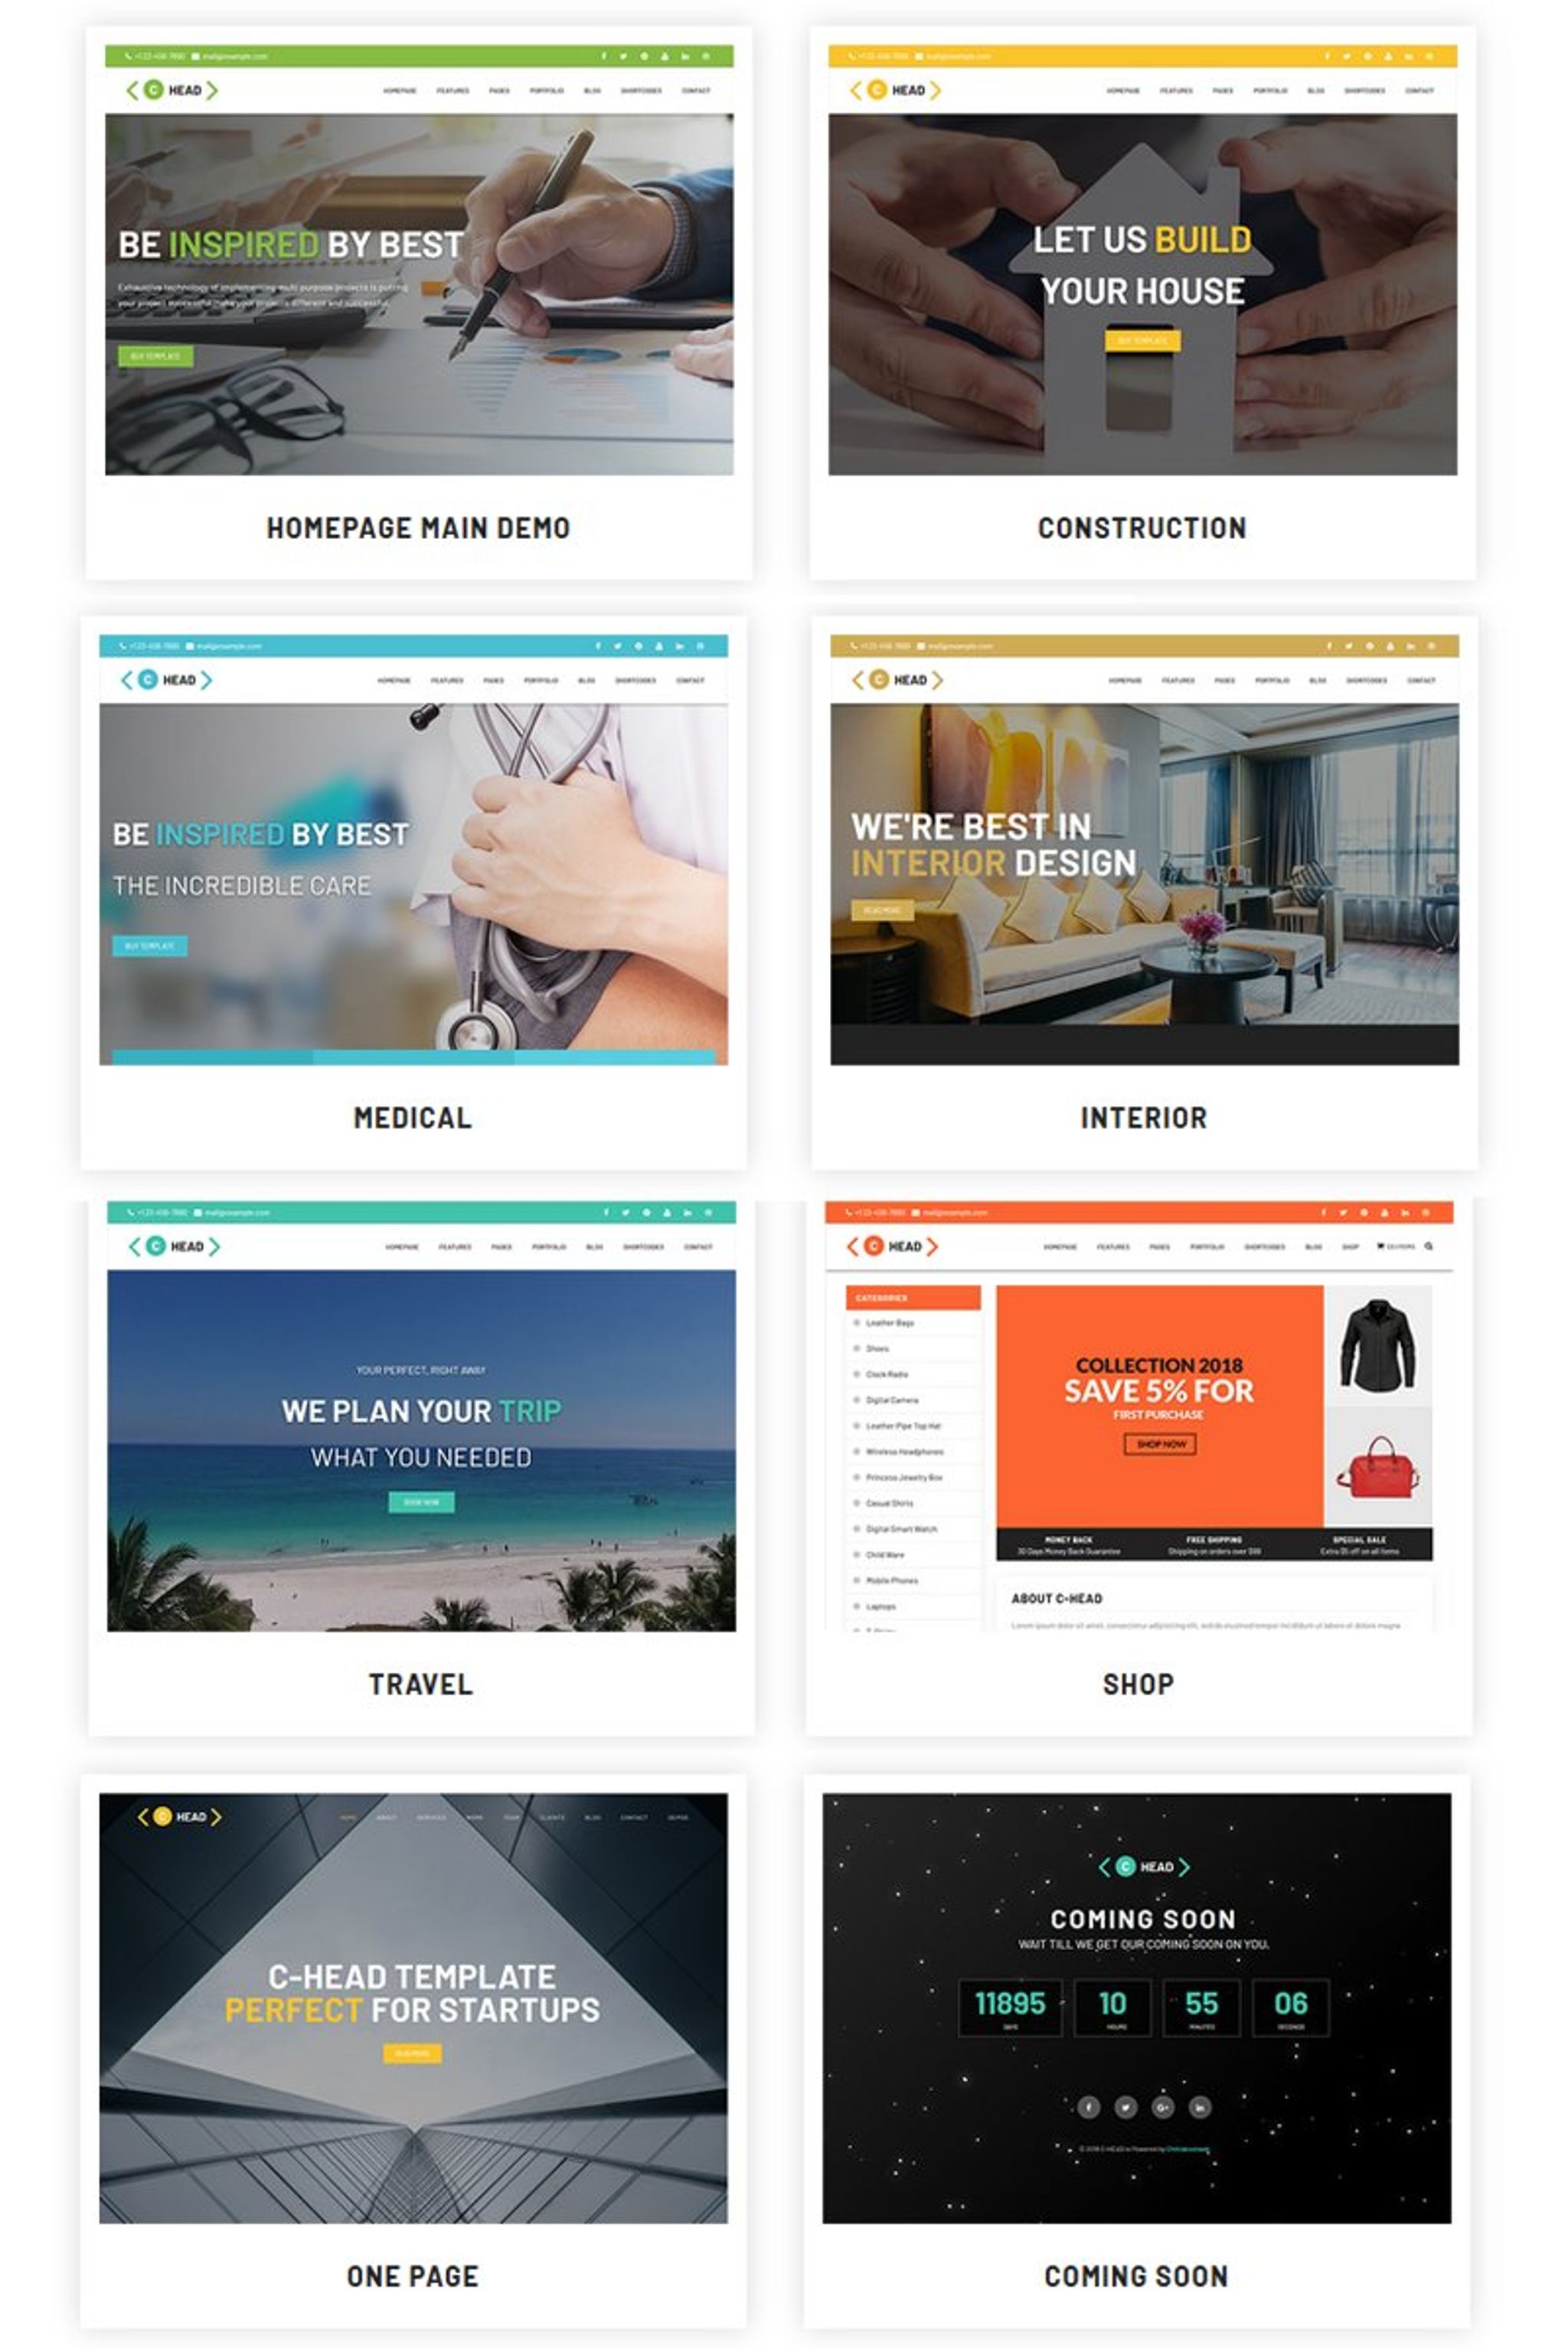 about us template for website